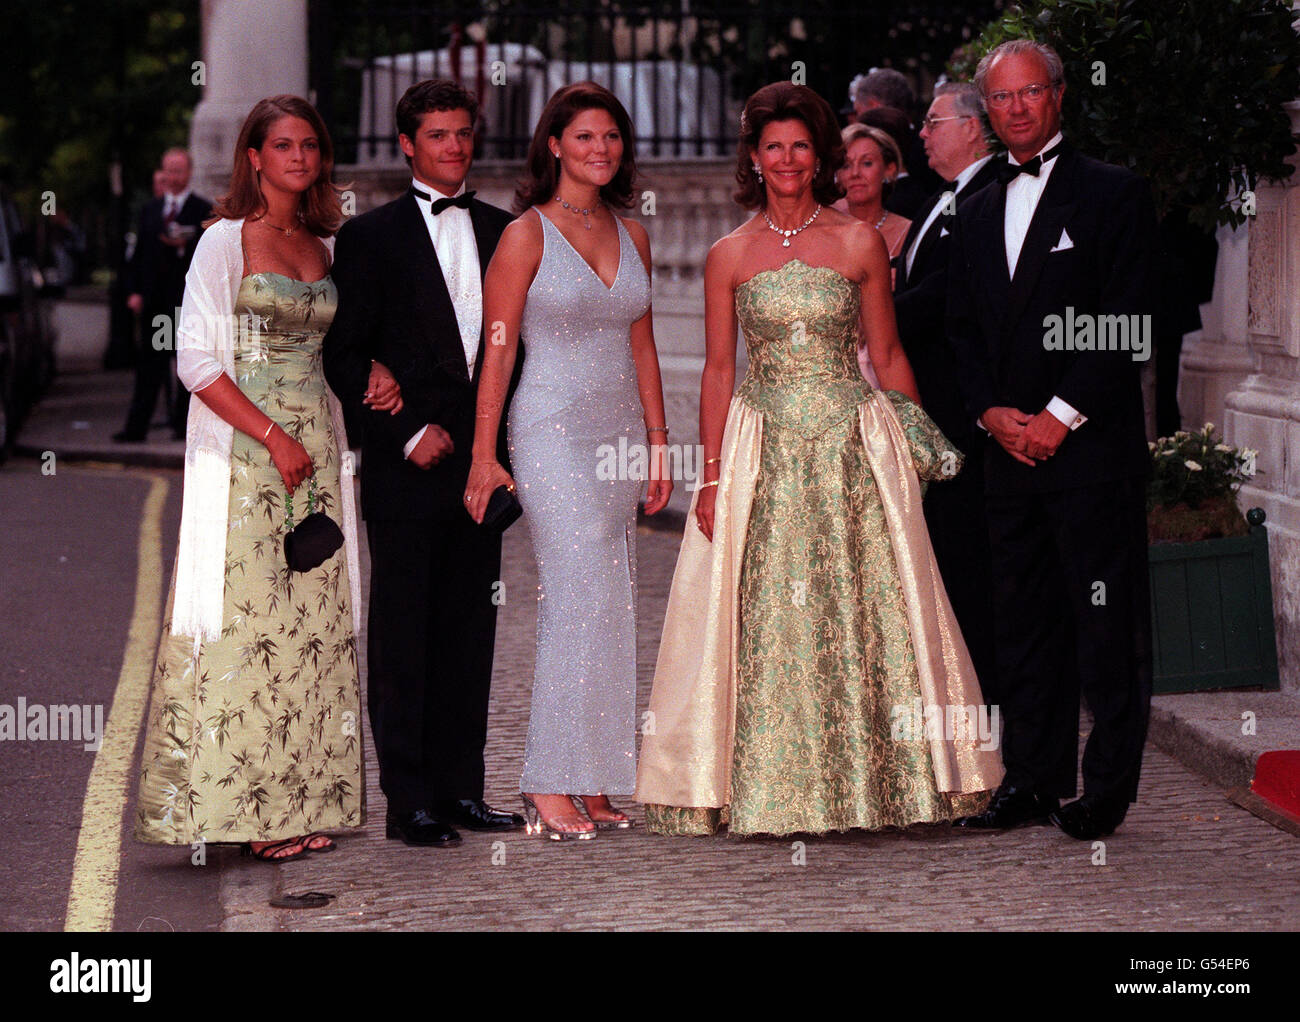 Queen Silvia, King Carl Gustaf of Sweden, their daughter Princess Victoria (c), their son, Prince Carl Philip and their younger daughter, Princess Madeleine, arrive at Bridgewater House in London before a ball two days before the wedding of Carlos Morales Quintana and Princess Alexia of Greece. Stock Photo